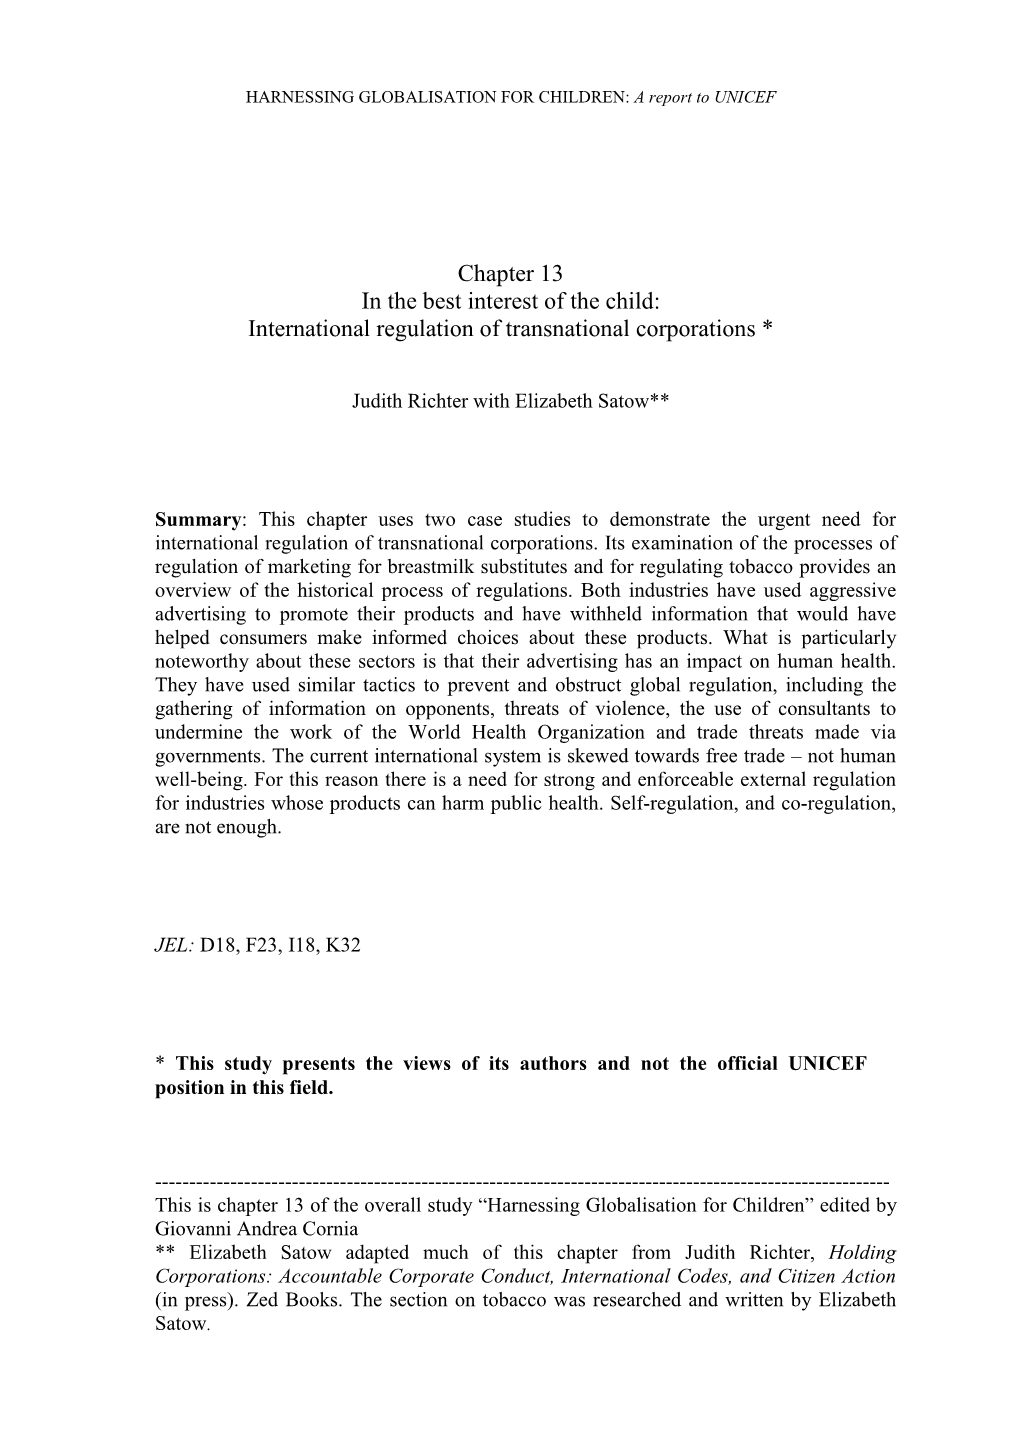 Chapter 13 in the Best Interest of the Child: International Regulation of Transnational Corporations *